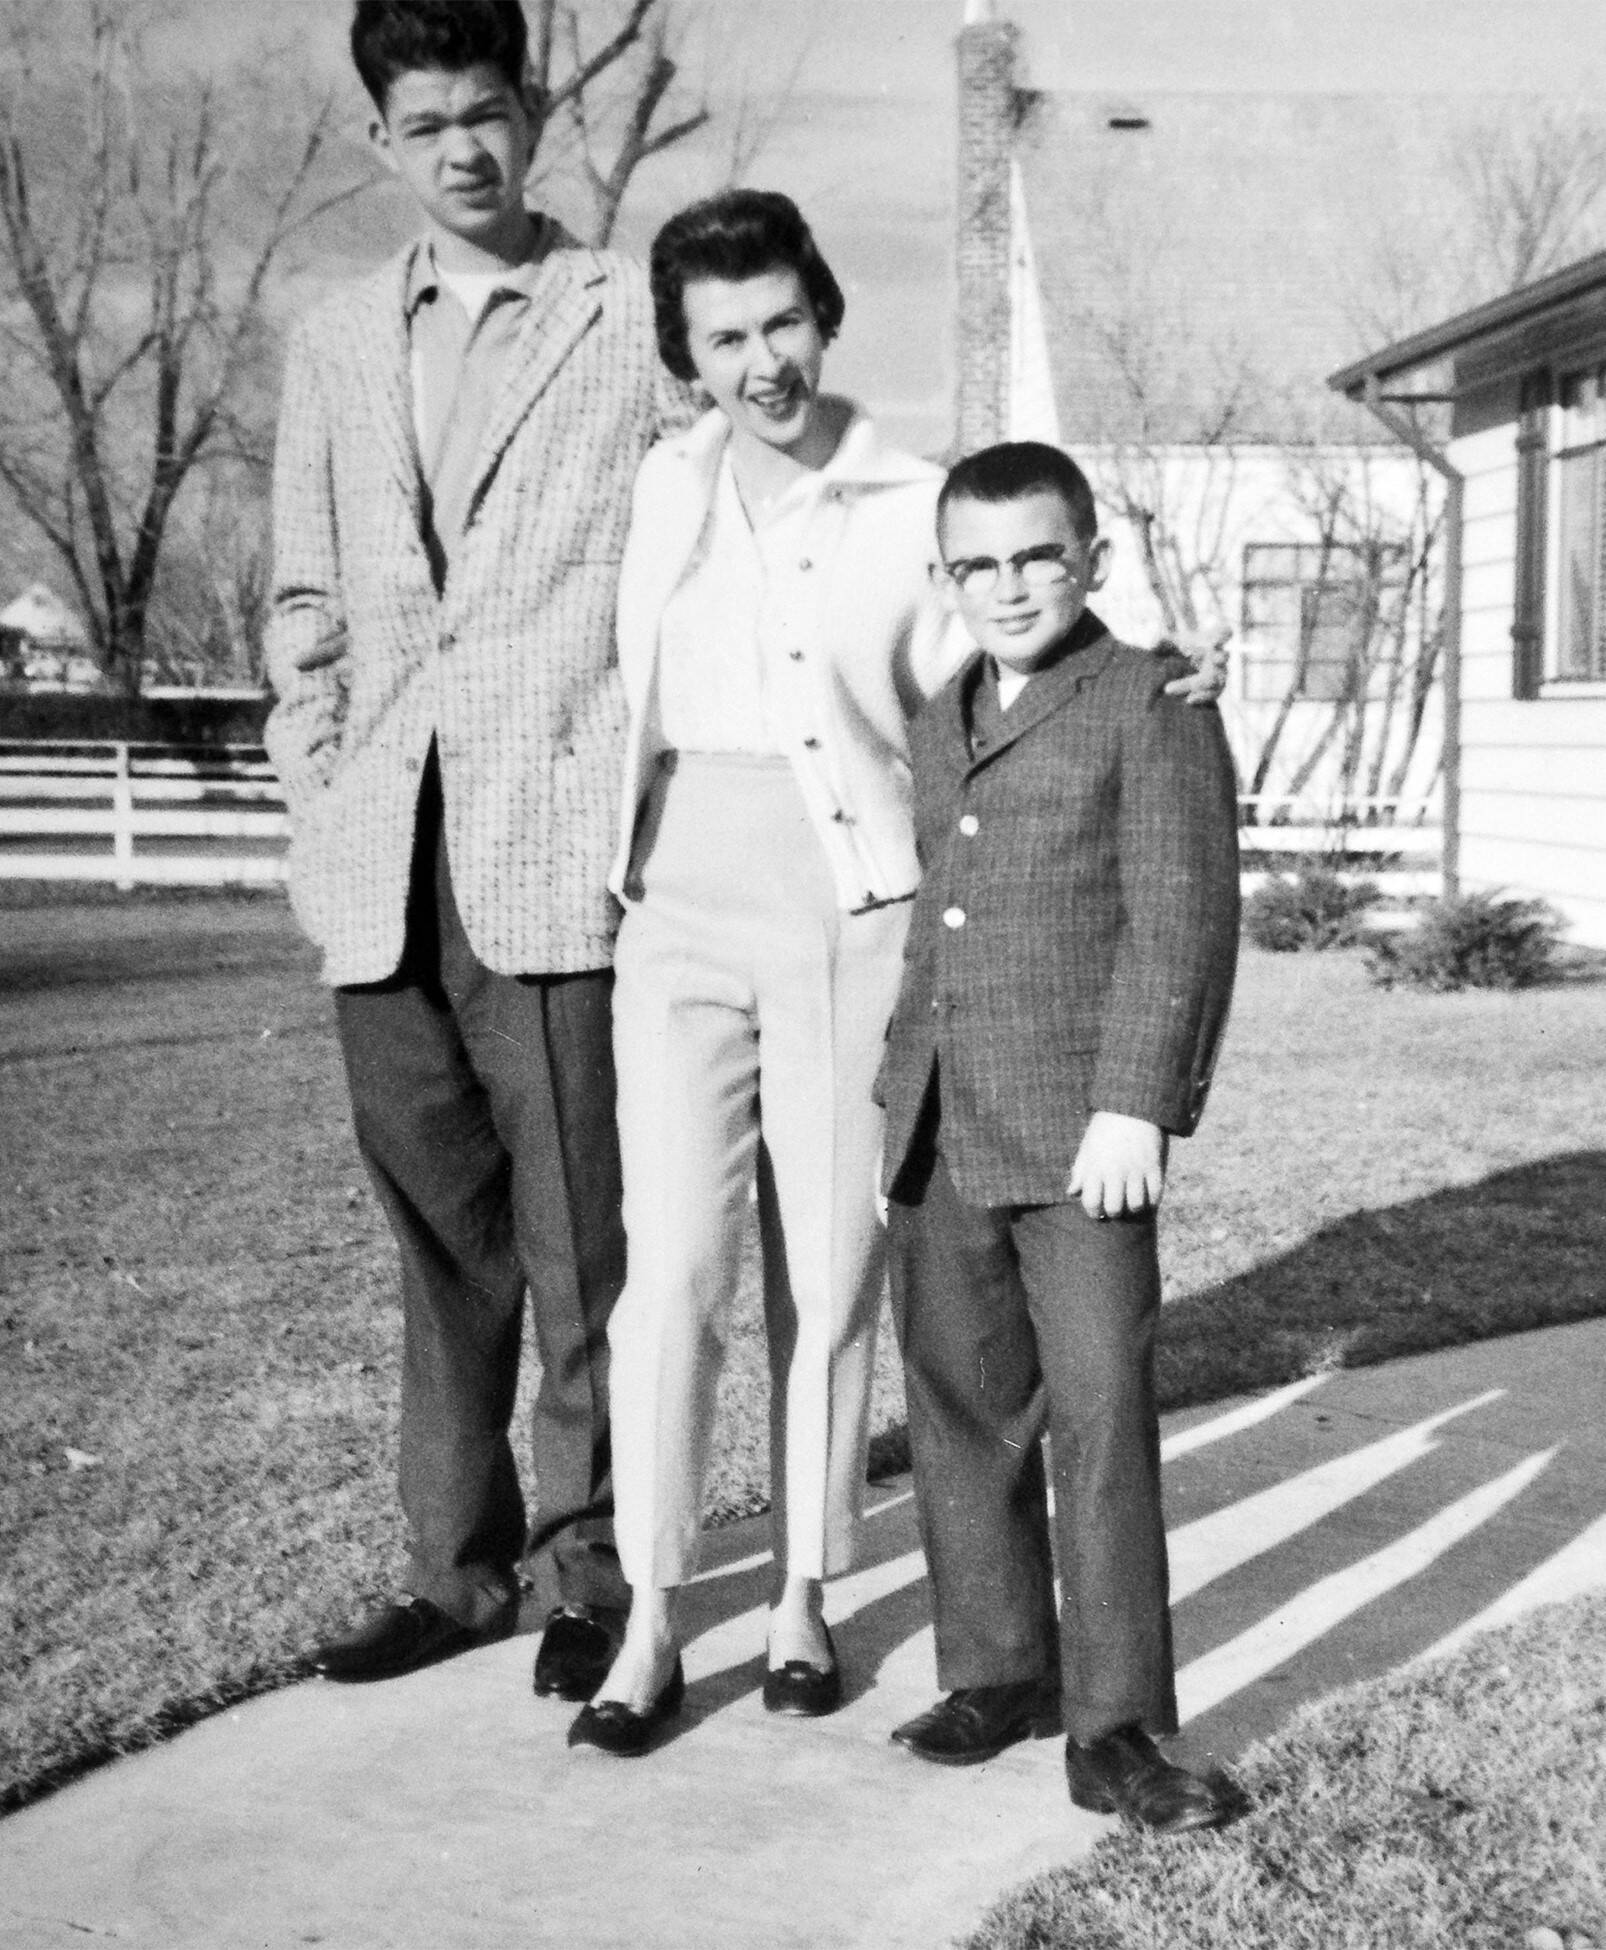 Stephen Trimble (right) at age 10 with his mother 39-year-old Isabelle (center) and 18-year-old brother Mike (left) in 1960. (Courtesy of Stephen Trimble)